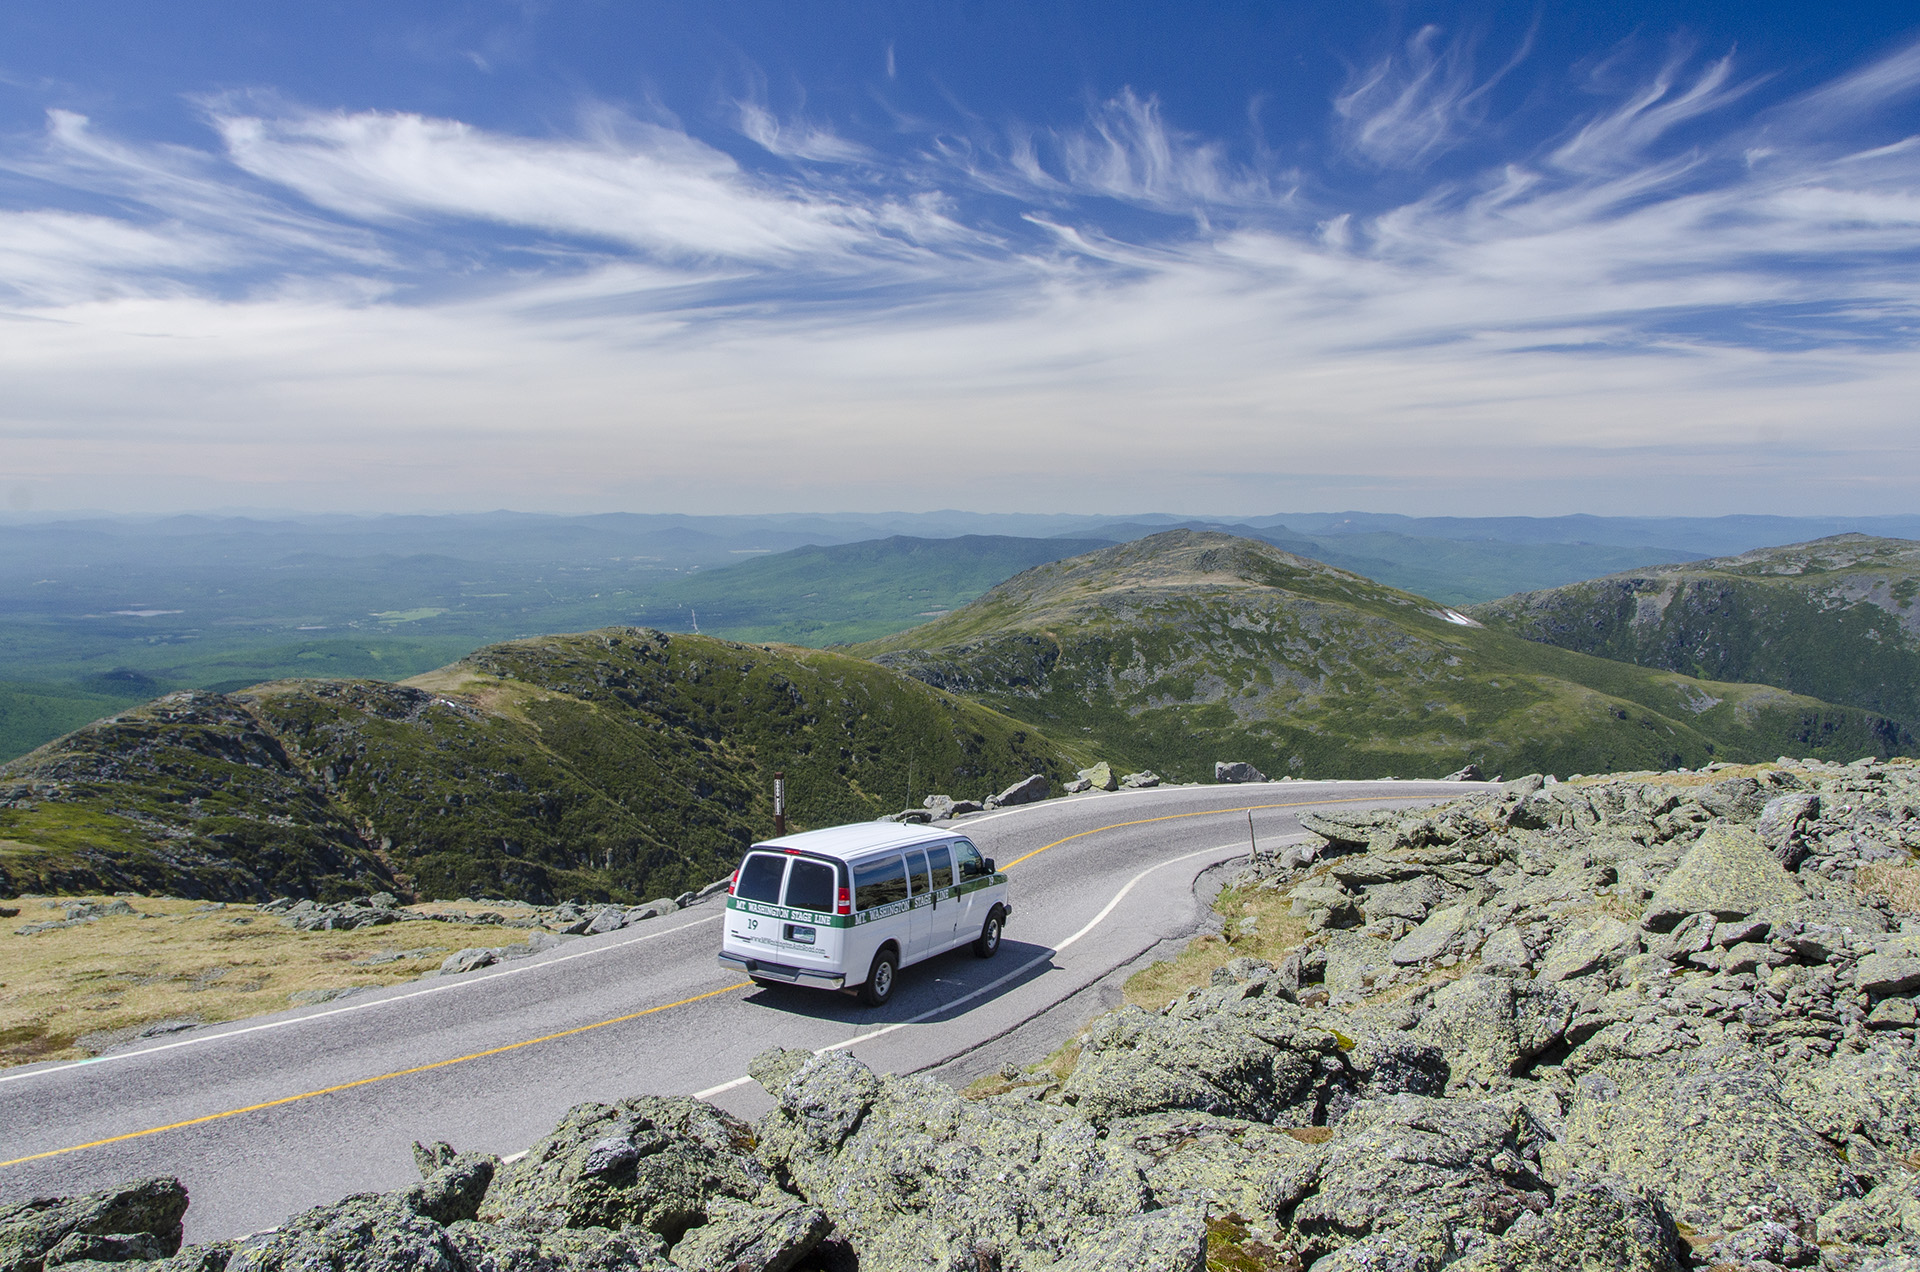 The legendary Mt. Washington Auto Road offers timeless and dramatic views of the Presidential Range and the highest peak in the Northeast is yours to enjoy summer and fall.